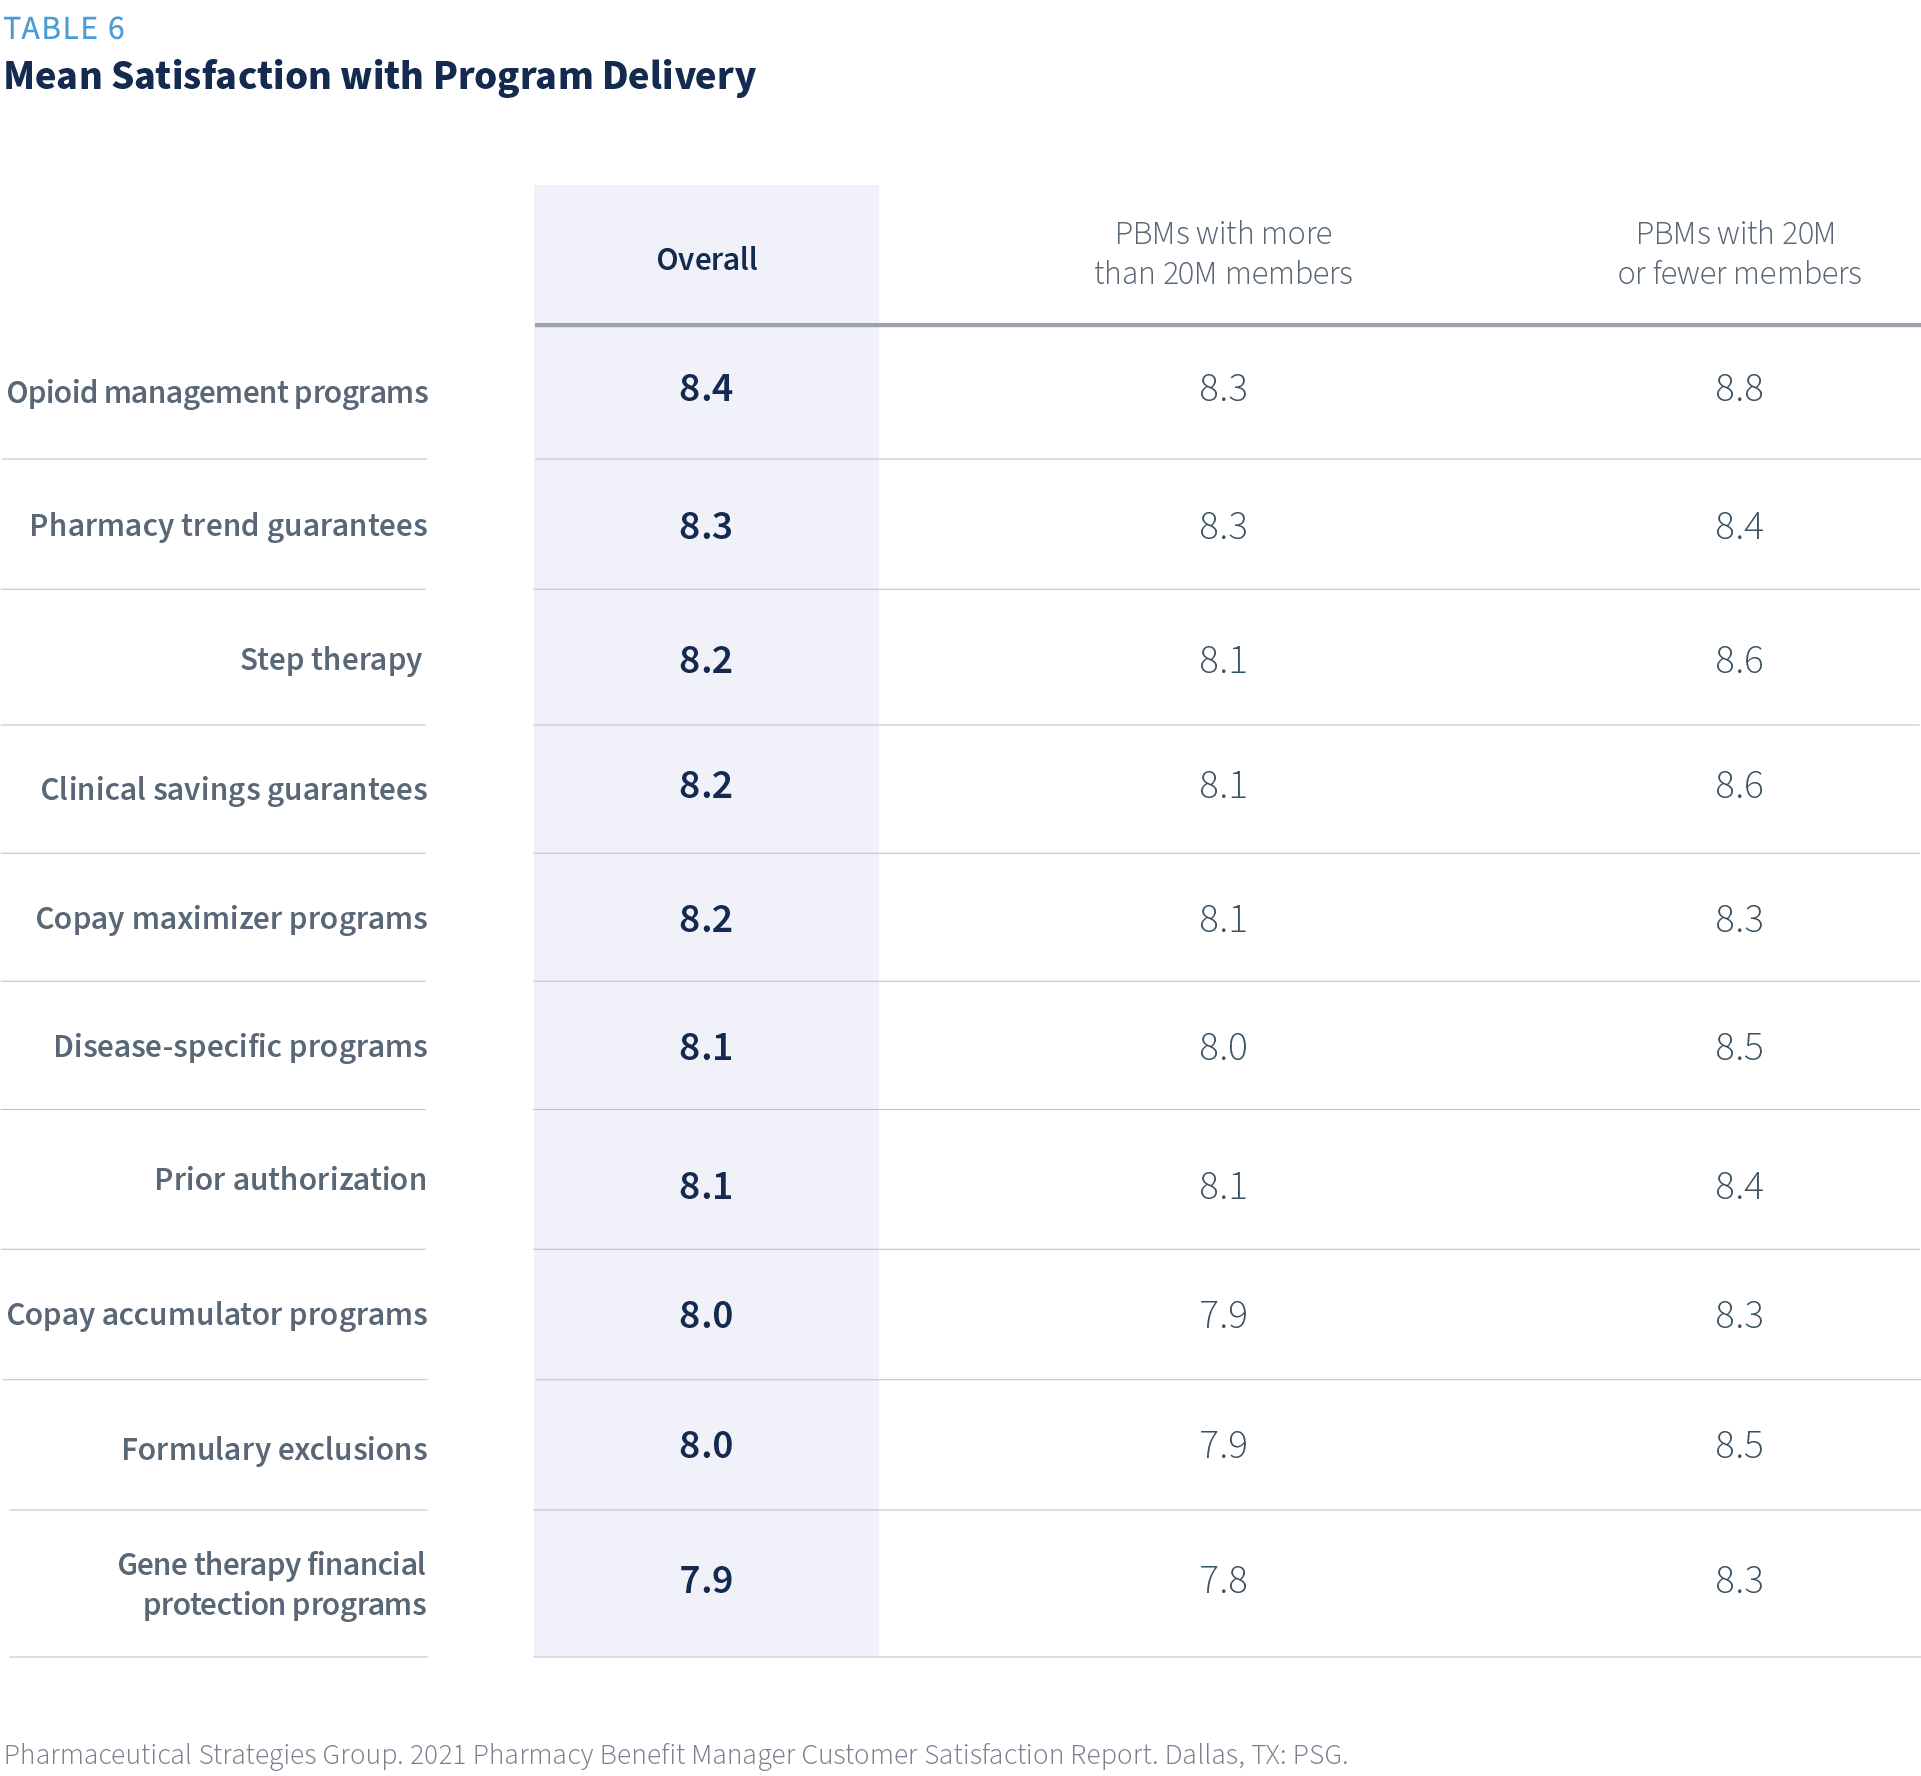 Mean satisfaction with program delivery survey results